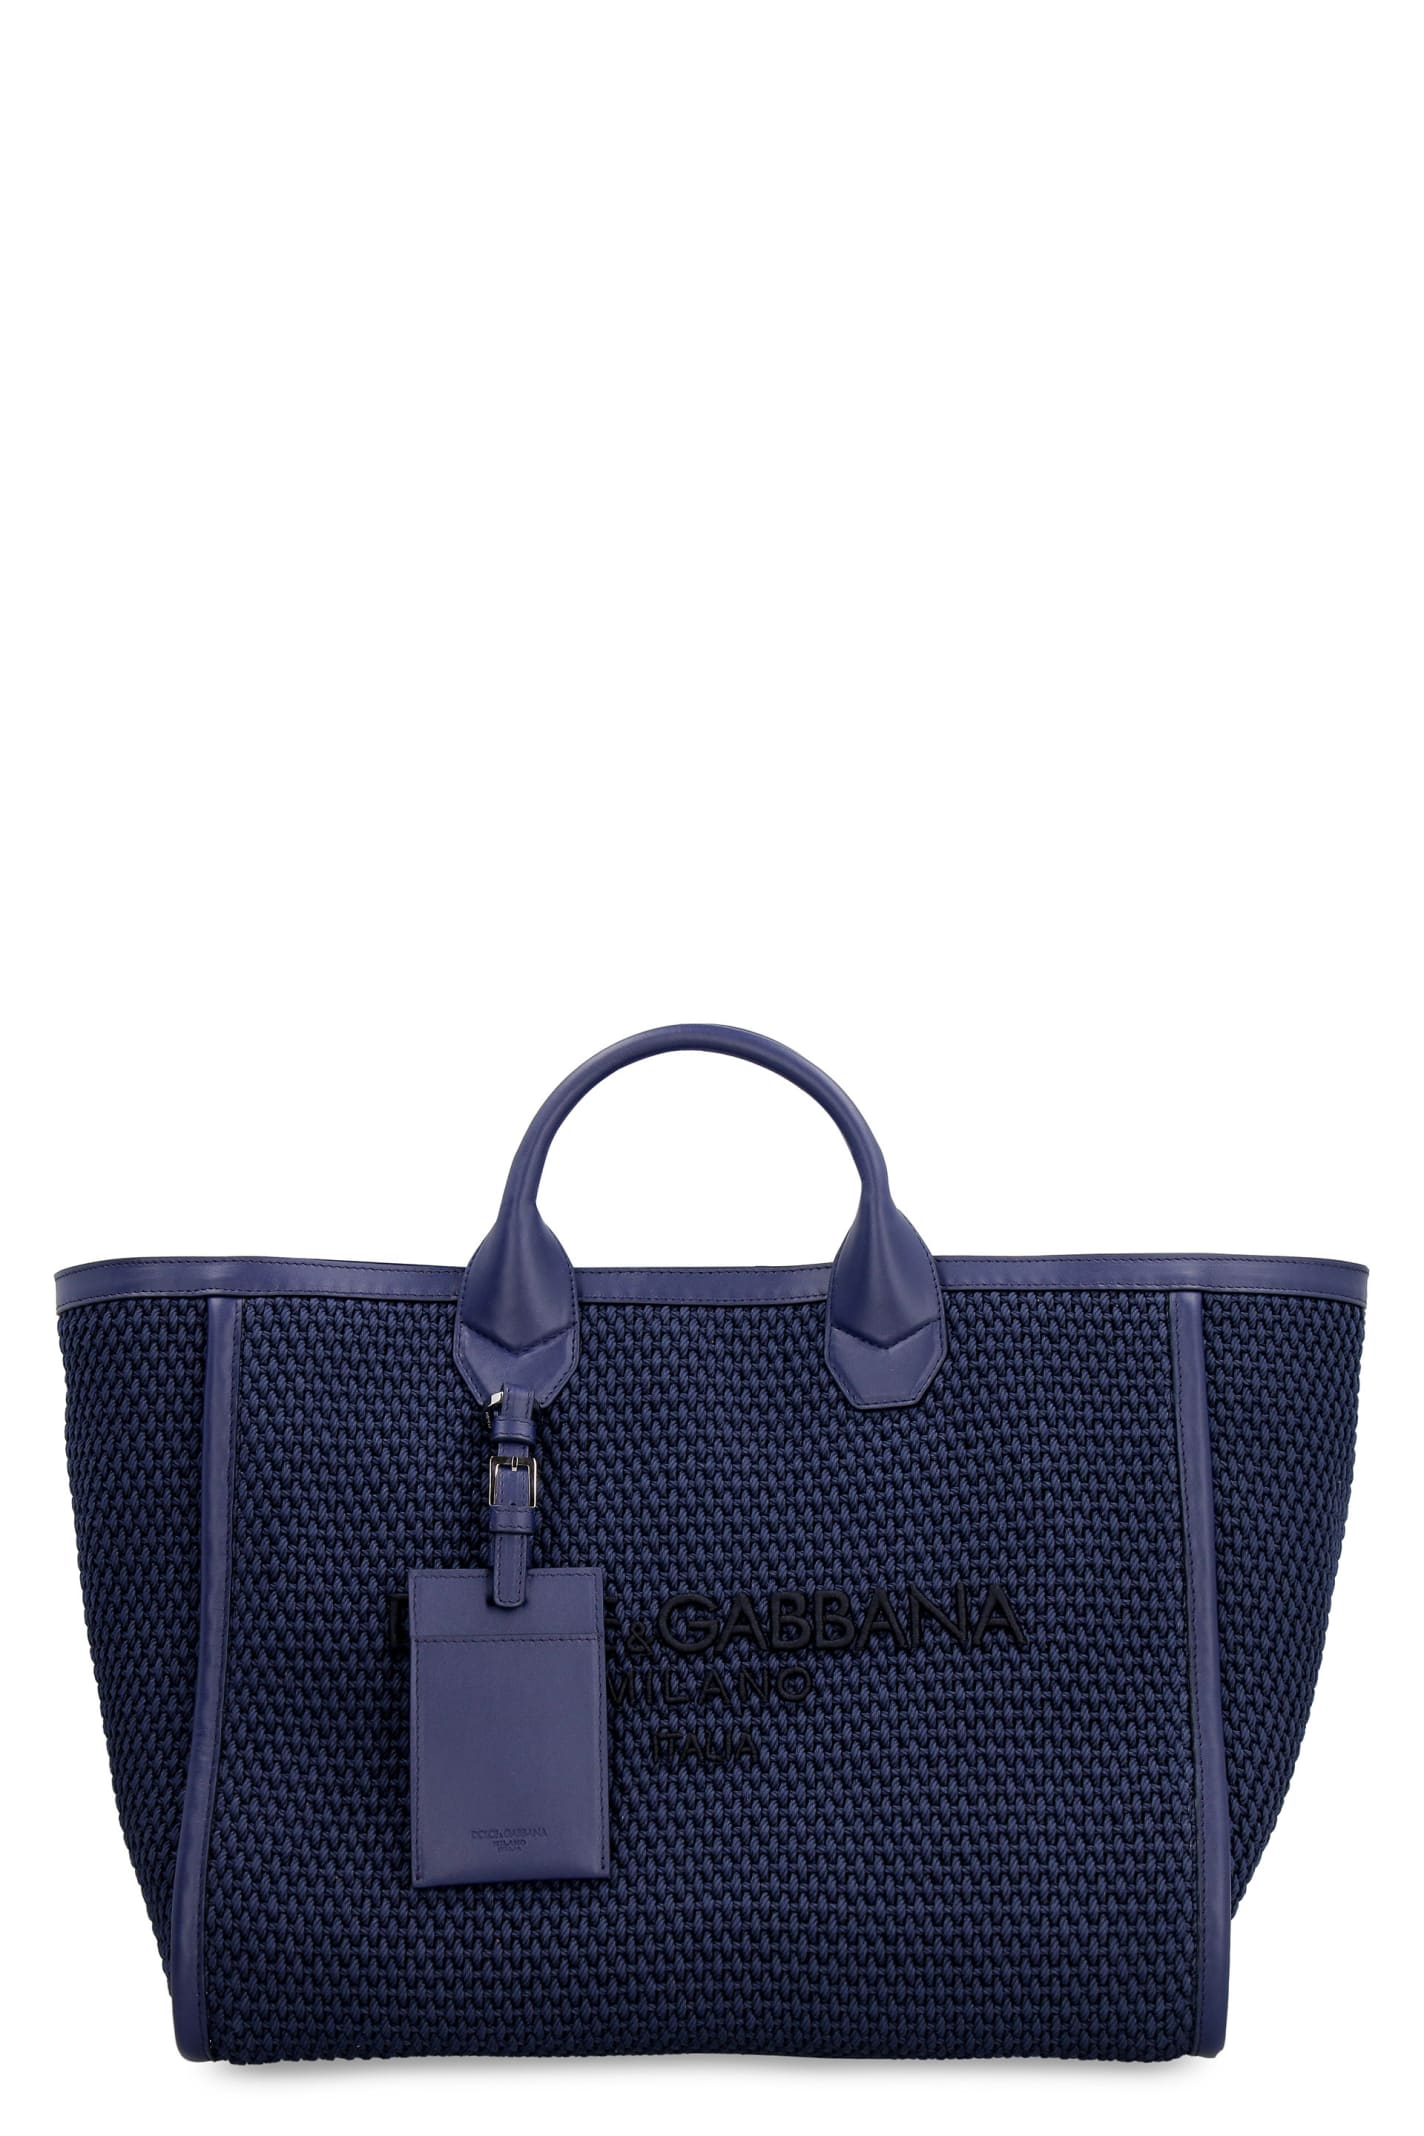 Dolce & Gabbana Canvas And Leather Shopping Bag In Blue